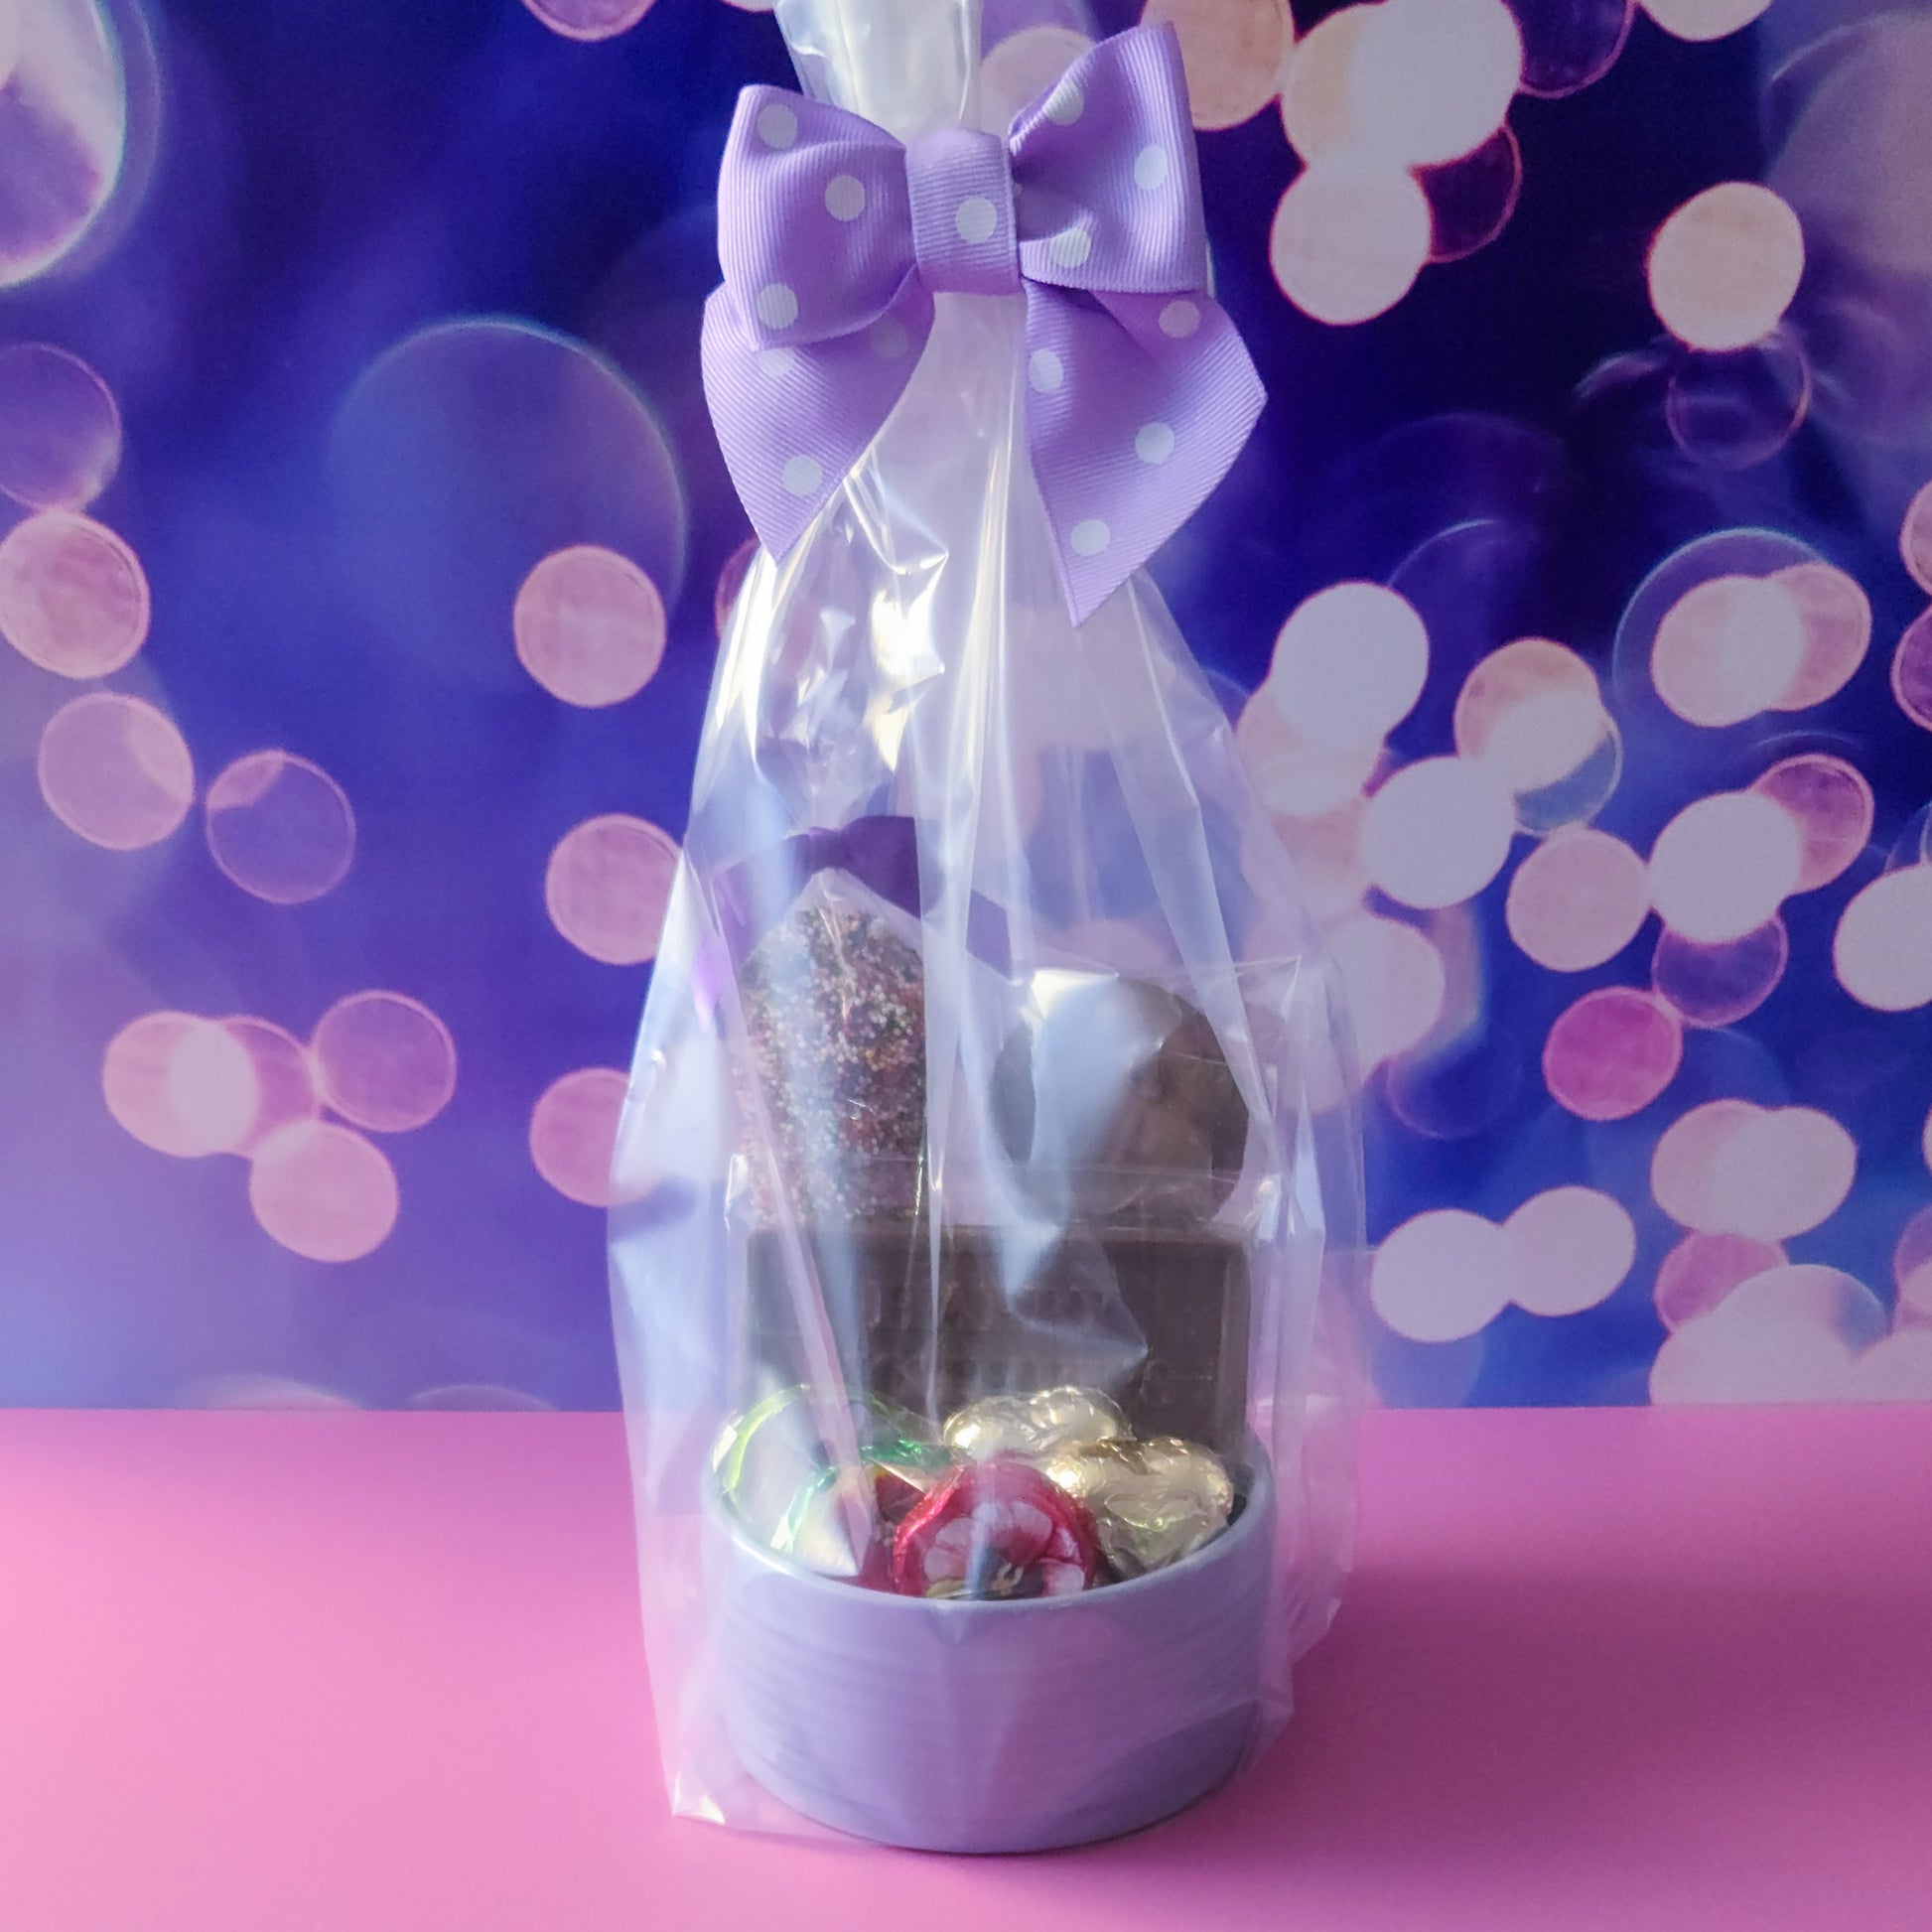 Need a gift for mom? This pastel purple candy dish makes the perfect gift!